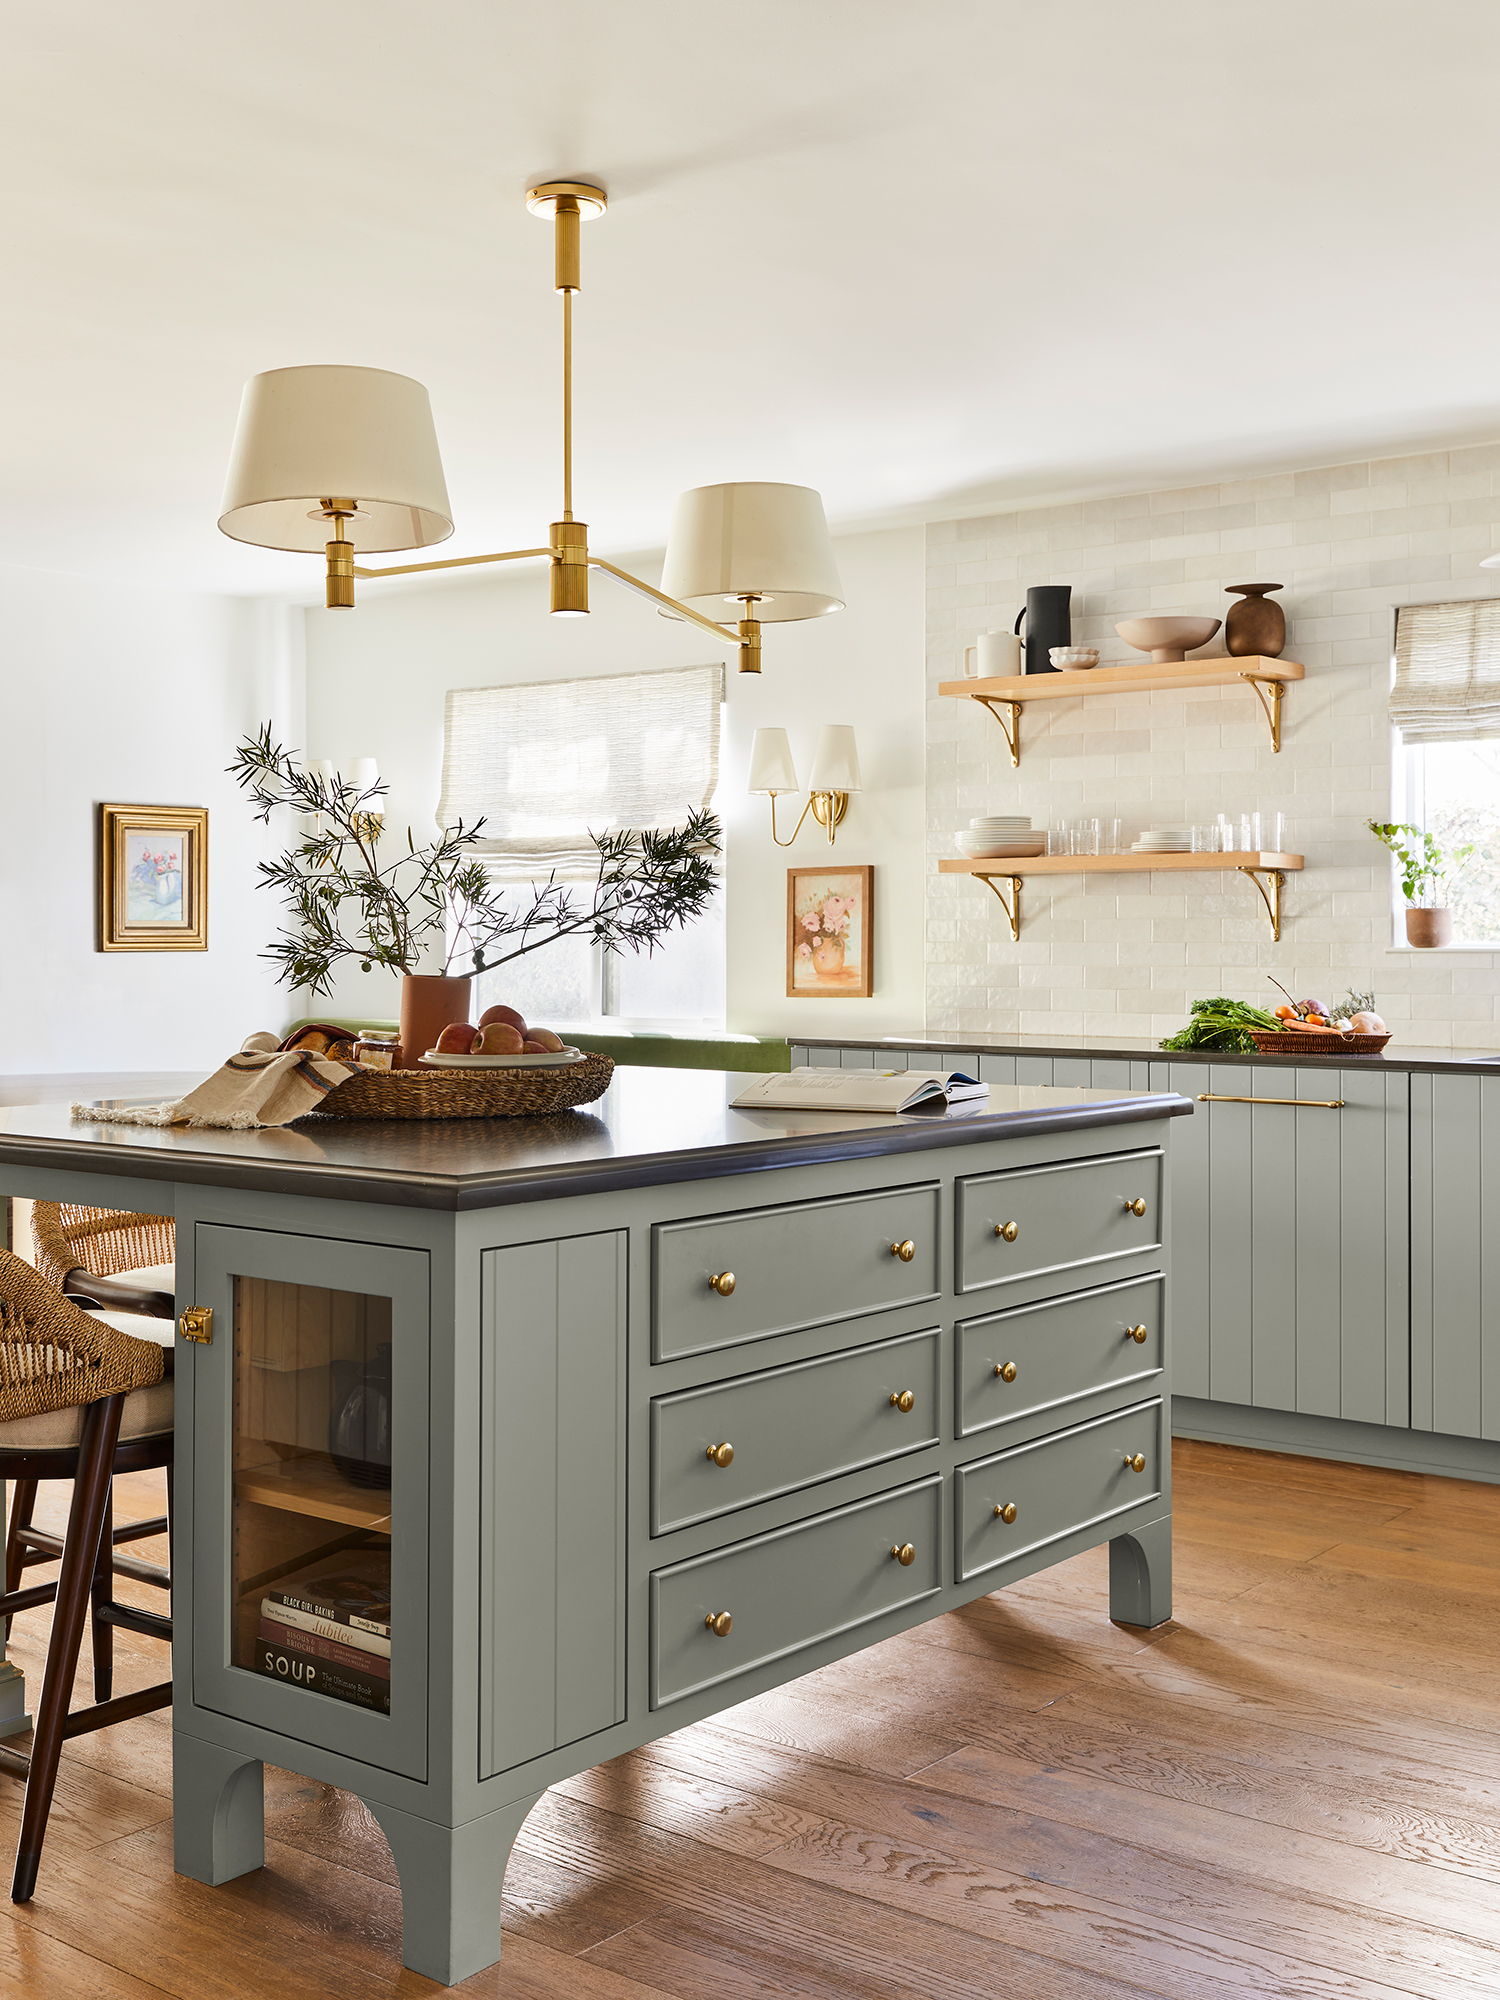 This Kitchen Went From Cramped to Glam for a Family of Five